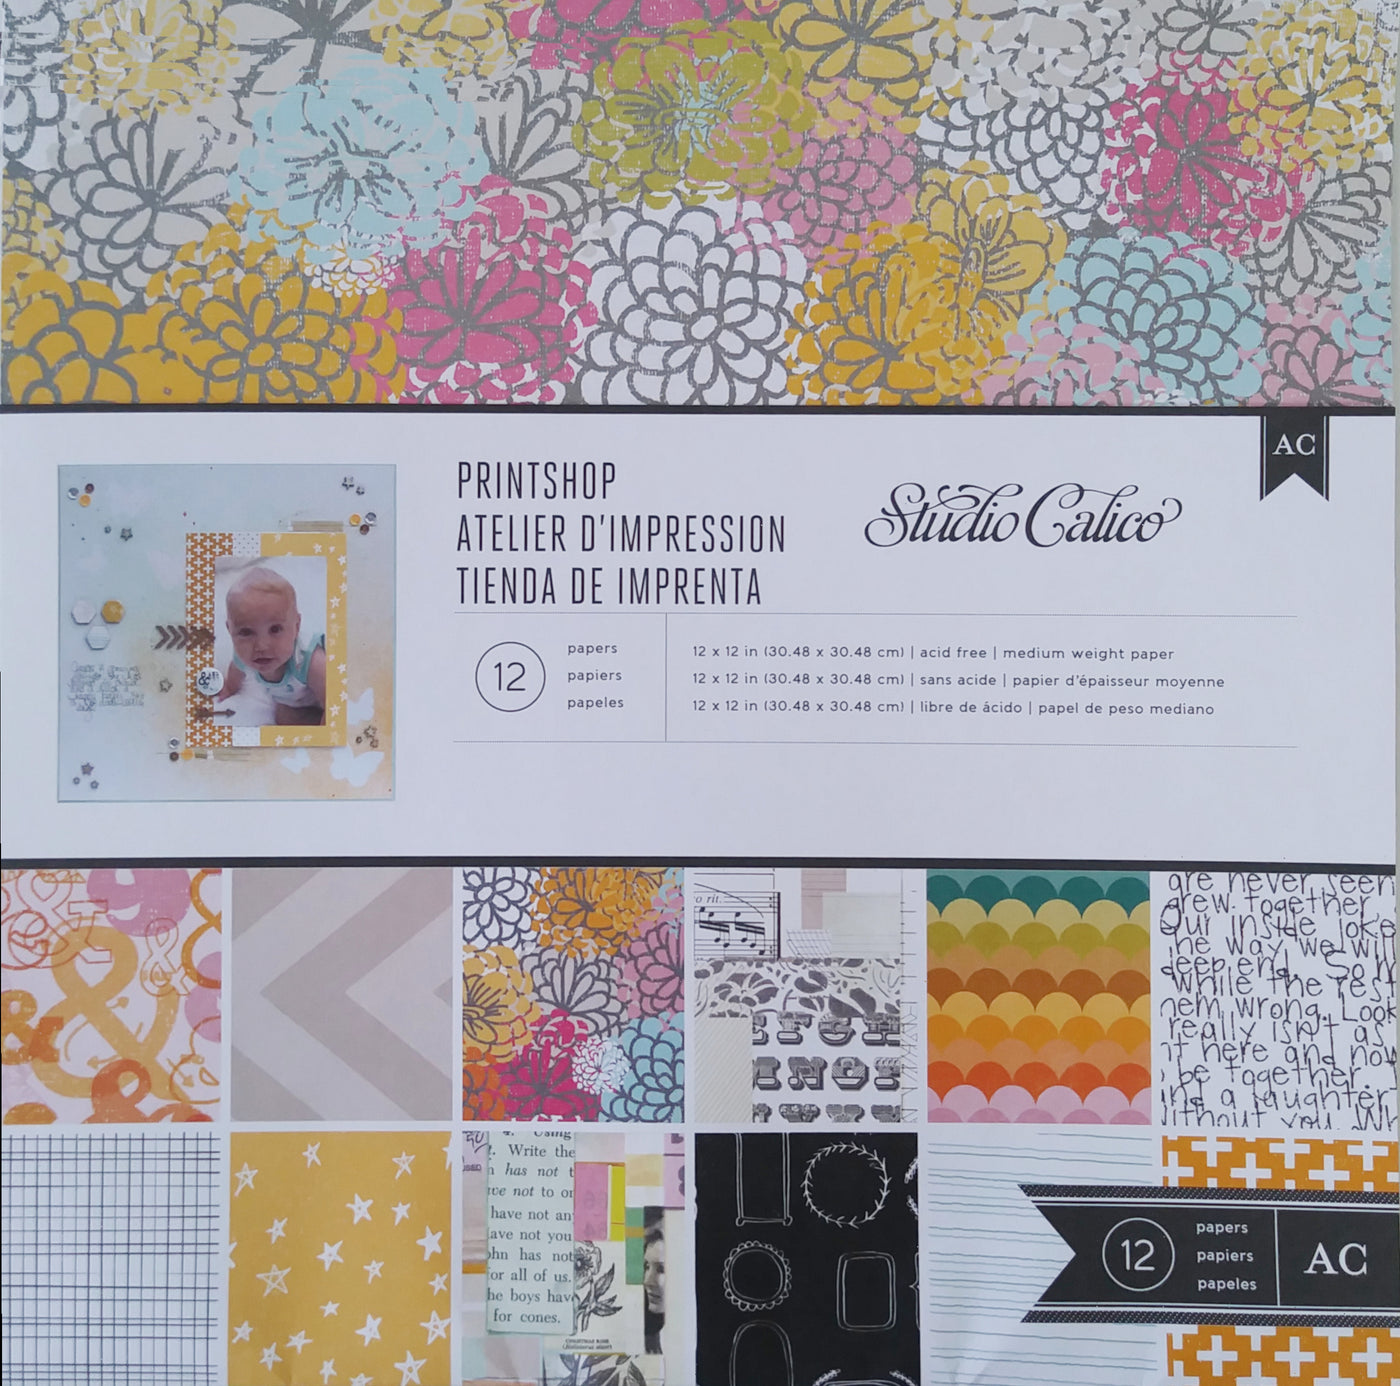 Printshop - collection kit with 12 double-sided papers in muted summer patterns - Studio Calico